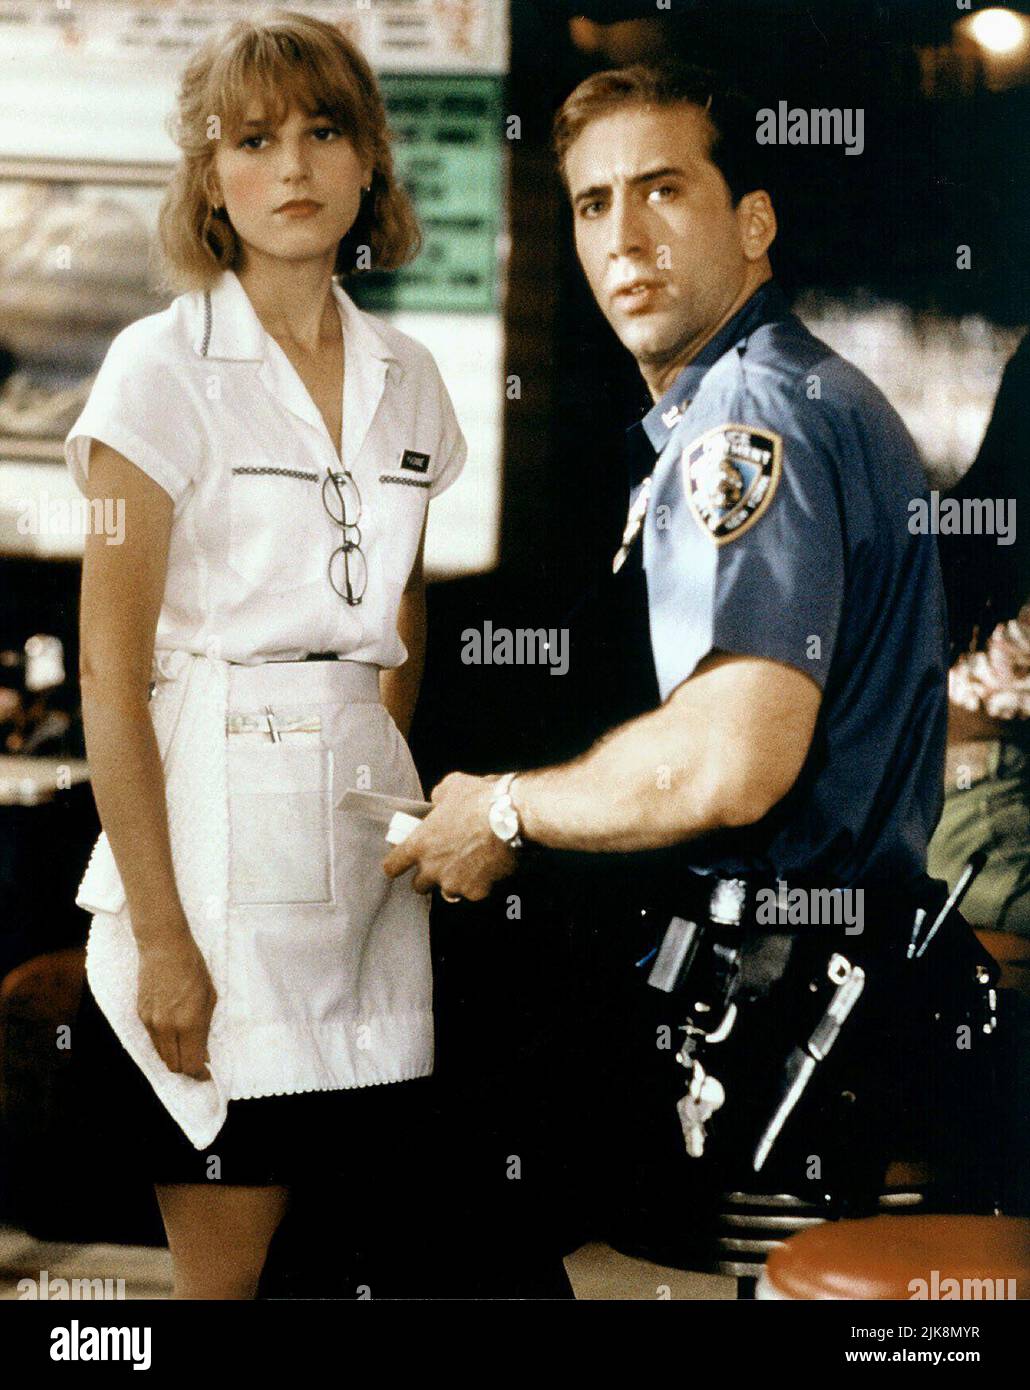 https://c8.alamy.com/comp/2JK8MYR/bridget-fonda-nicolas-cage-film-it-could-happen-to-you-1994-characters-yvonne-biasi-charlie-lang-director-andrew-bergman-29-july-1994-warning-this-photograph-is-for-editorial-use-only-and-is-the-copyright-of-tristar-andor-the-photographer-assigned-by-the-film-or-production-company-and-can-only-be-reproduced-by-publications-in-conjunction-with-the-promotion-of-the-above-film-a-mandatory-credit-to-tristar-is-required-the-photographer-should-also-be-credited-when-known-no-commercial-use-can-be-granted-without-written-authority-from-the-film-company-2JK8MYR.jpg